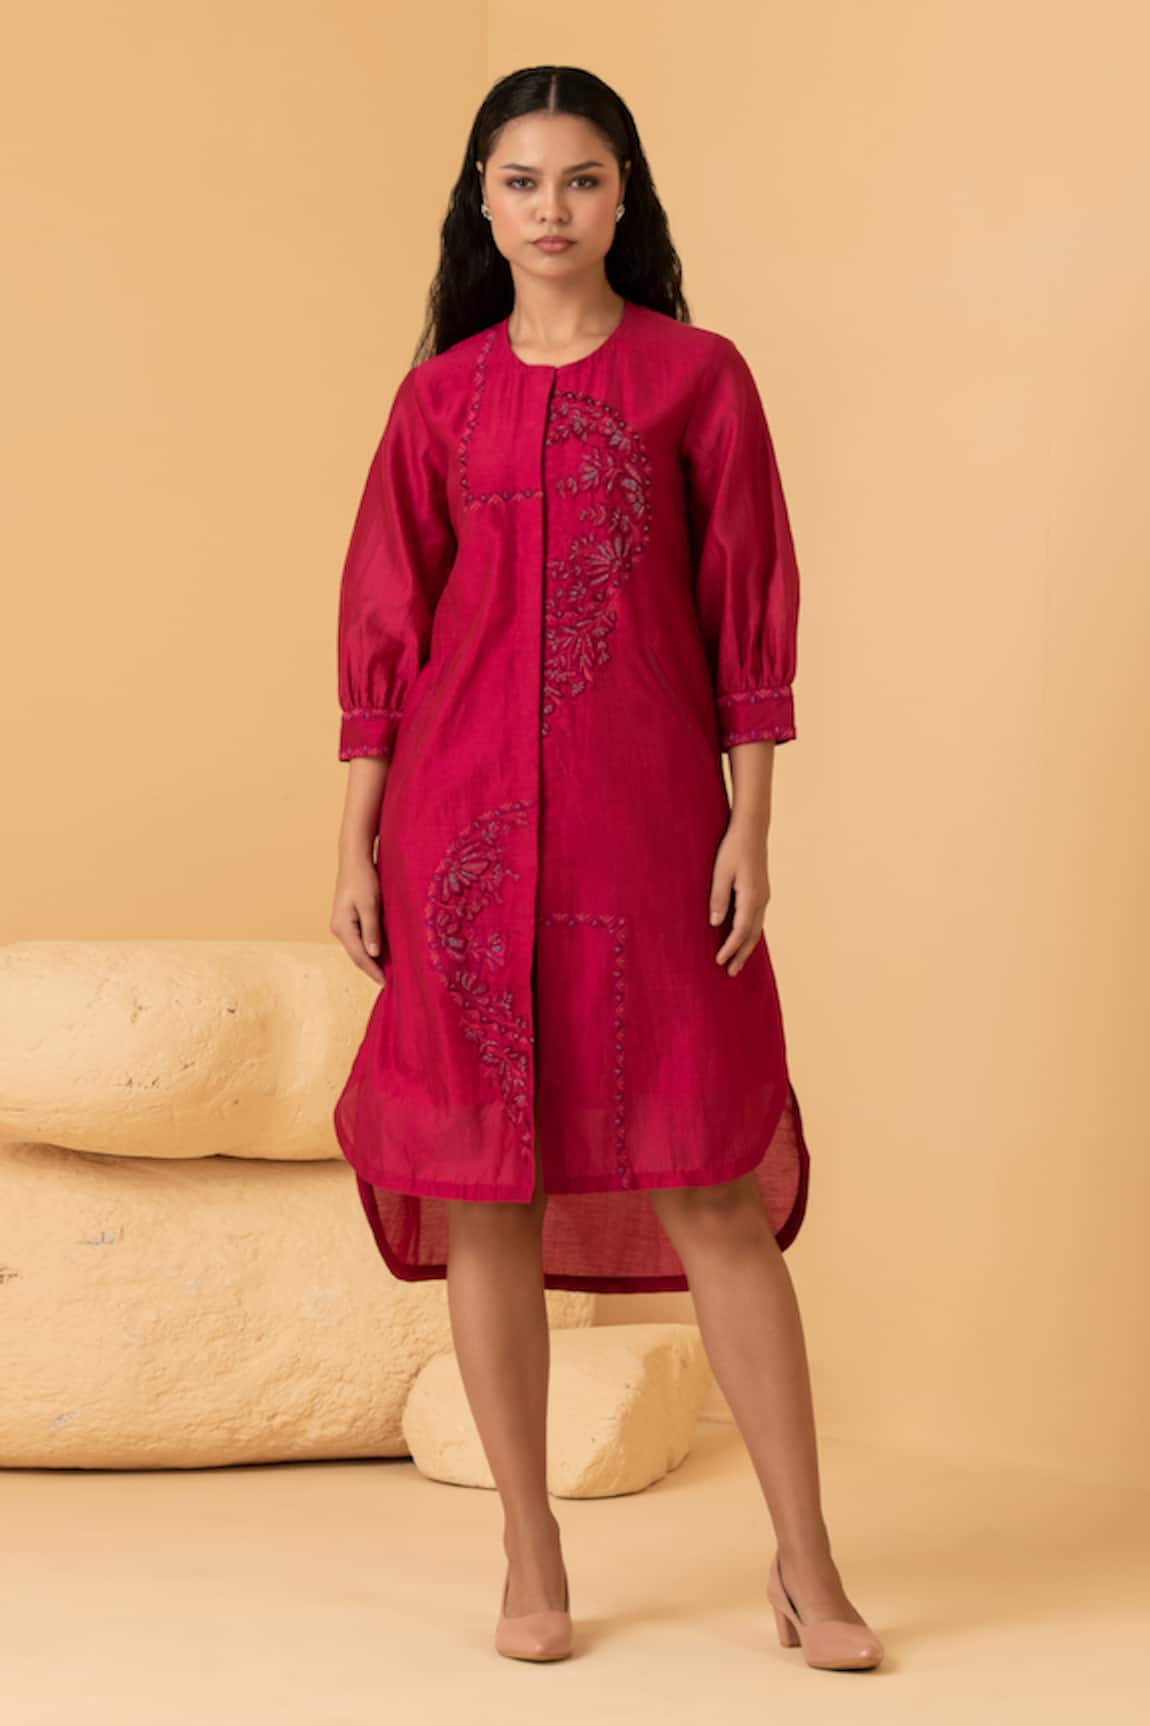 Divi by sonal khandelwal Chanderi Thread Embroidered Dress